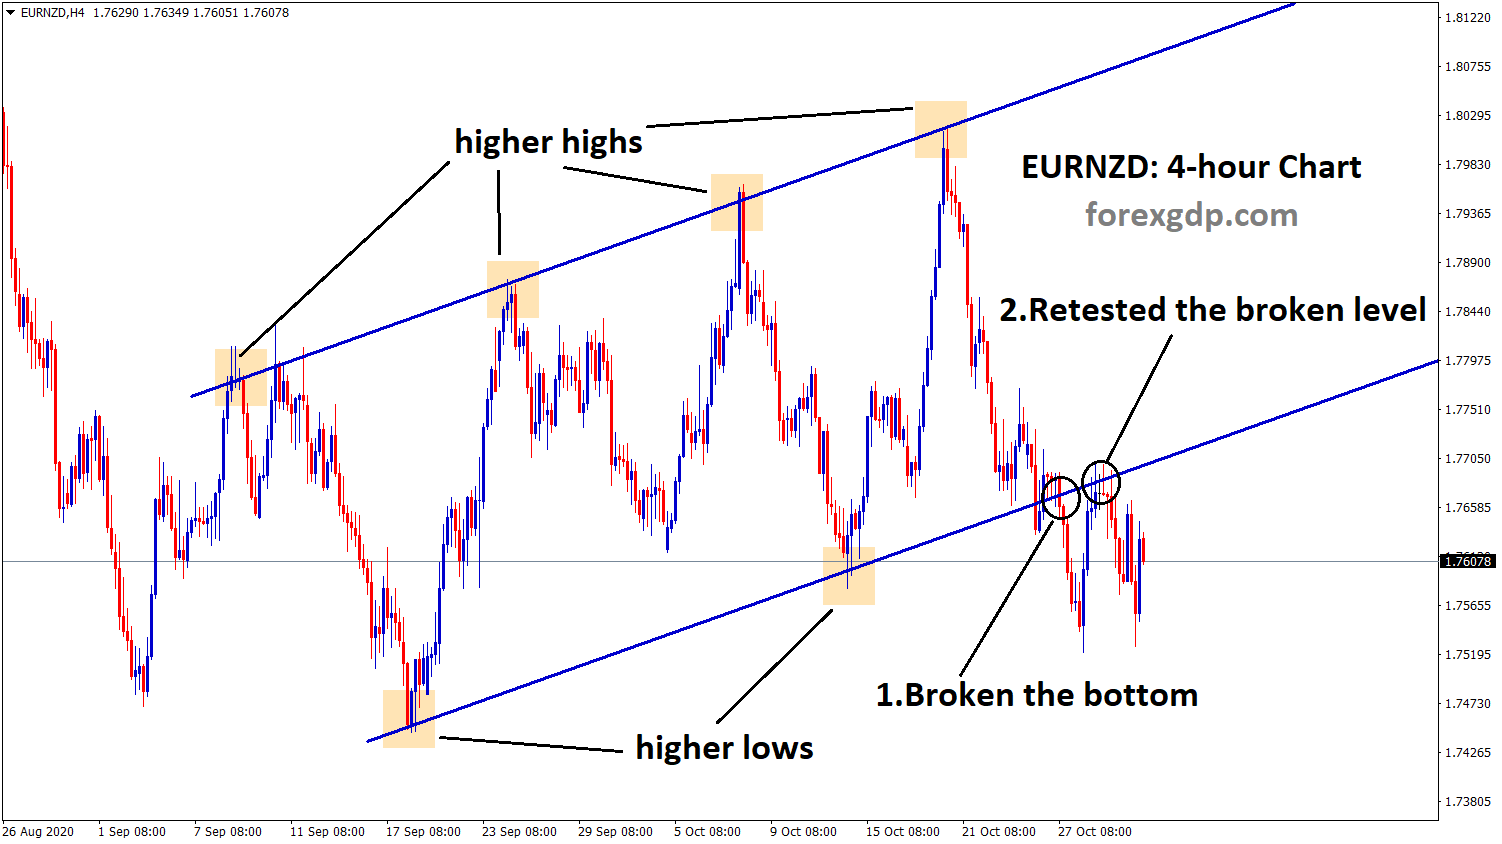 EURNZD has broken the bottom and retested the broken level